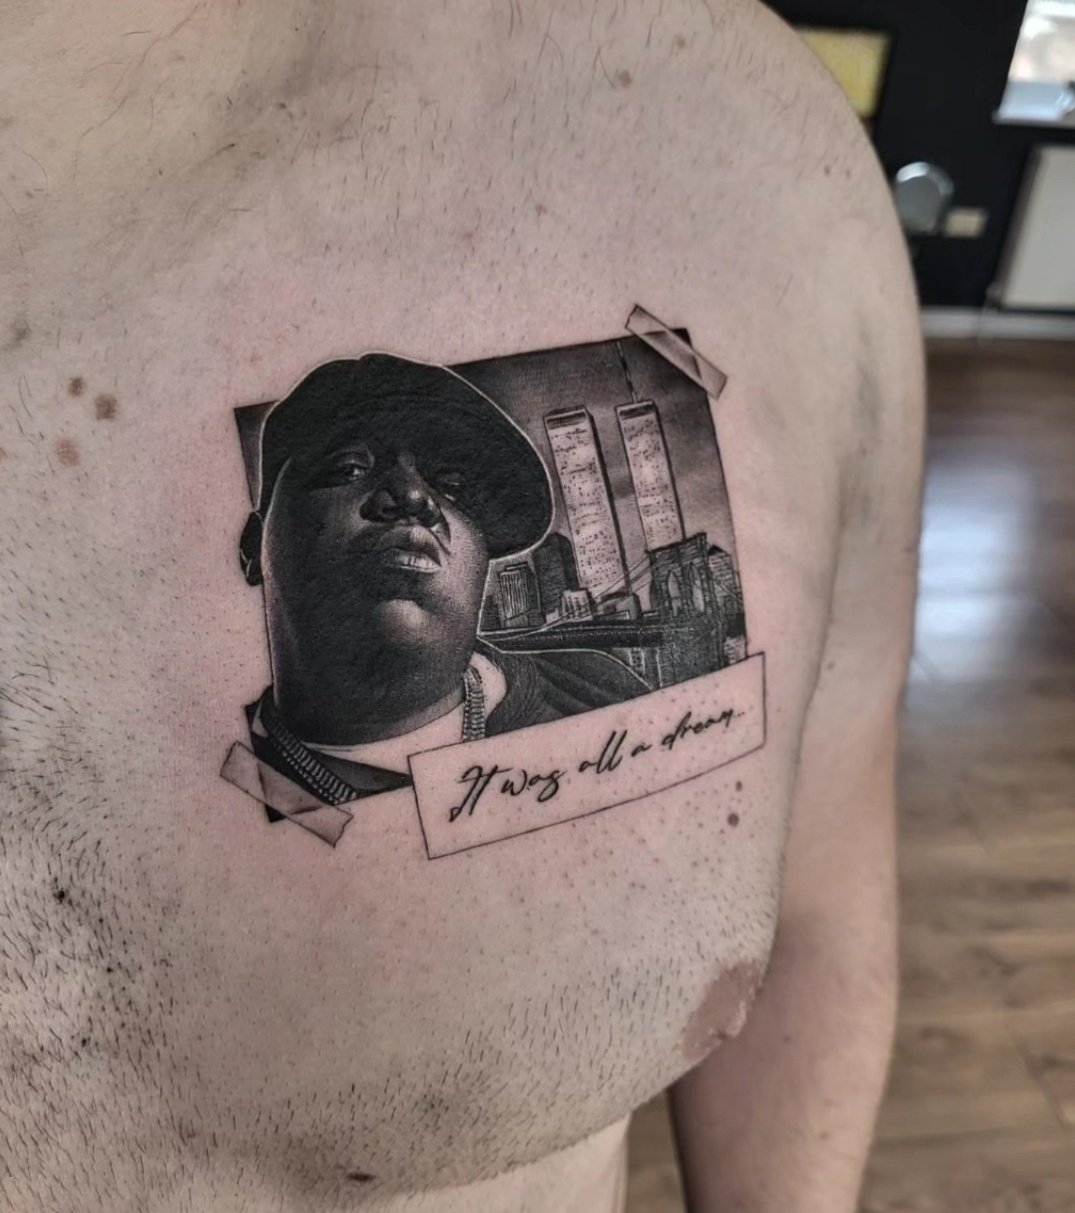 Teens dream tattoo goes viral for all the wrong reasons